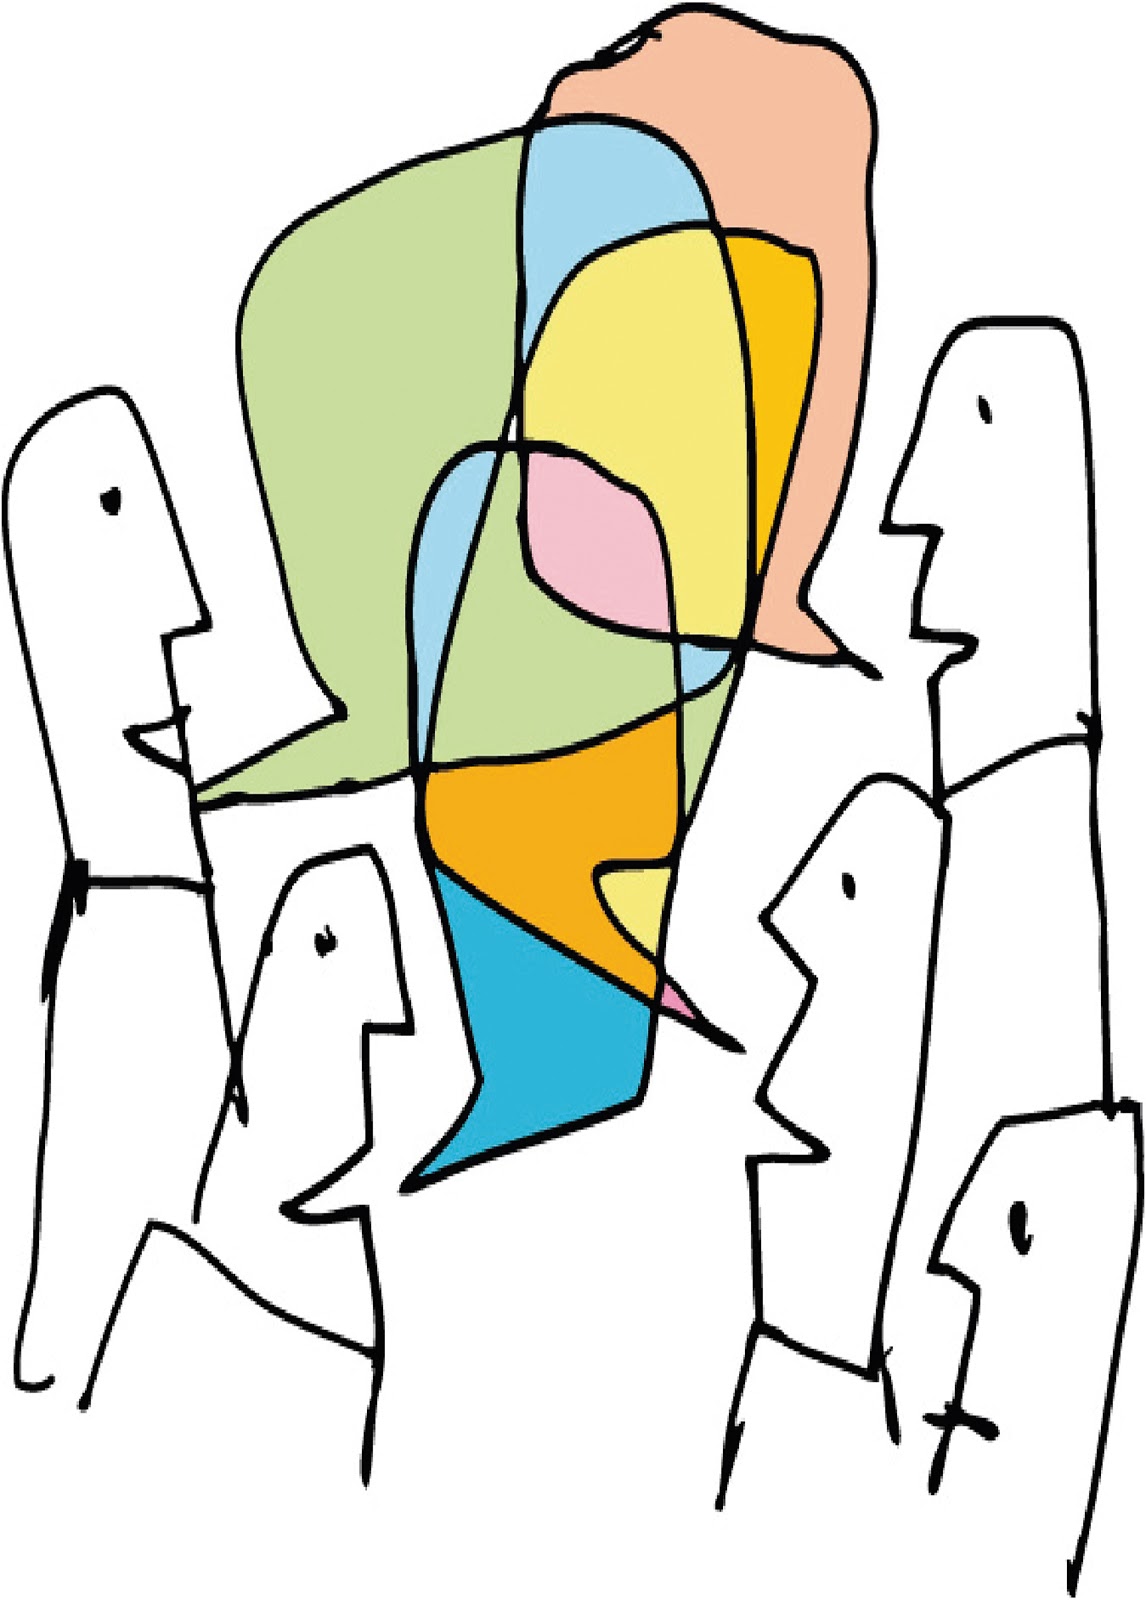 Cartoon Of People Talking - Cliparts.co